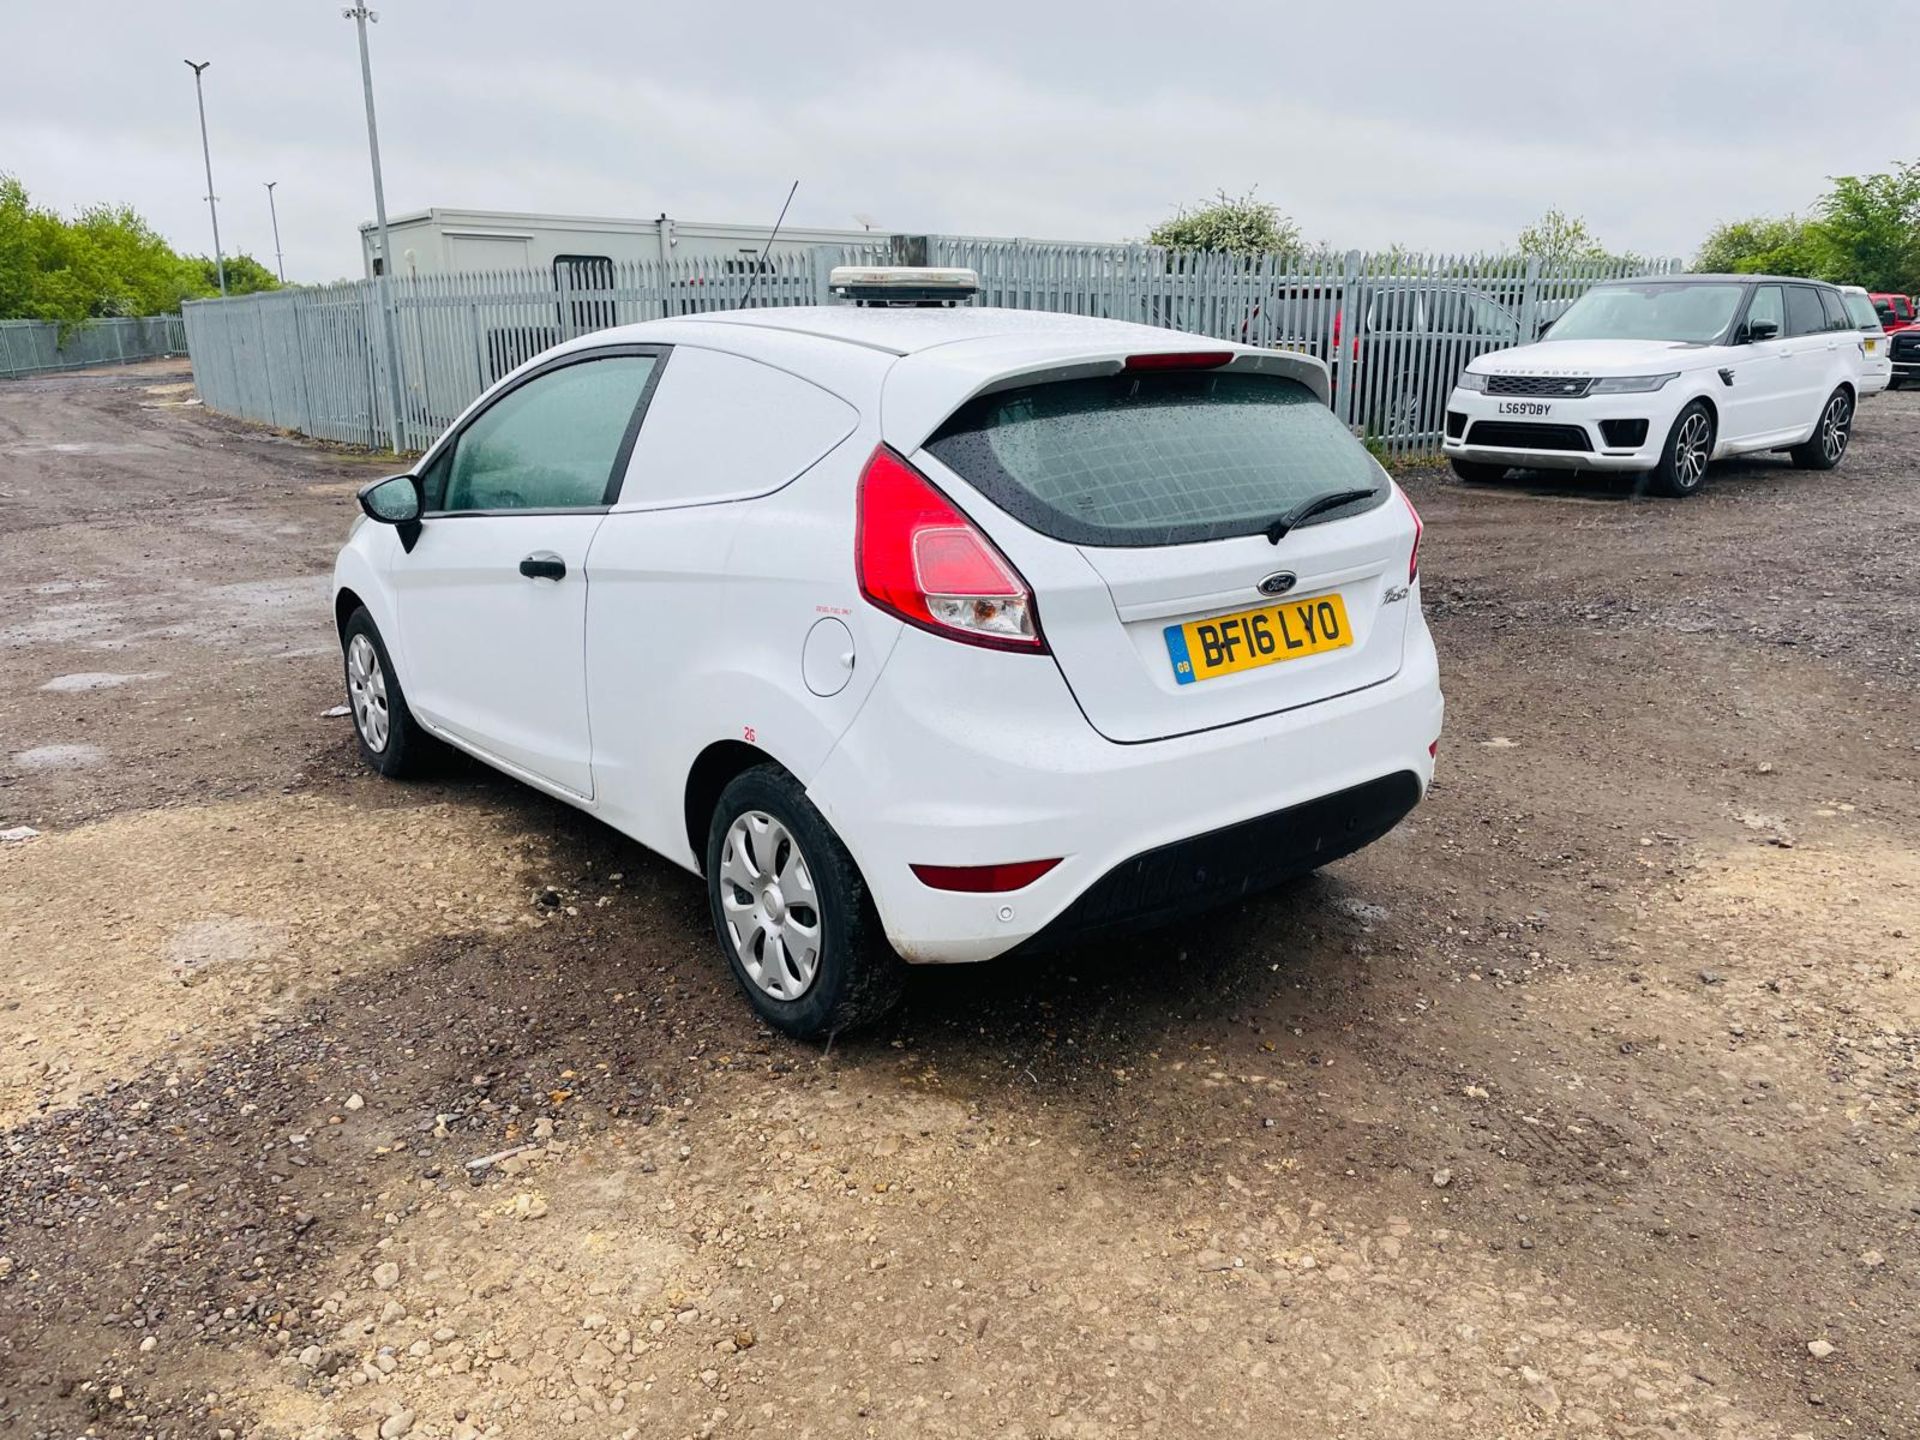 ** ON SALE ** Ford Fiesta 1.5 TDCI EcoNetic 2016 '16 Reg' Very Economical - Parking Sensors - Image 5 of 25